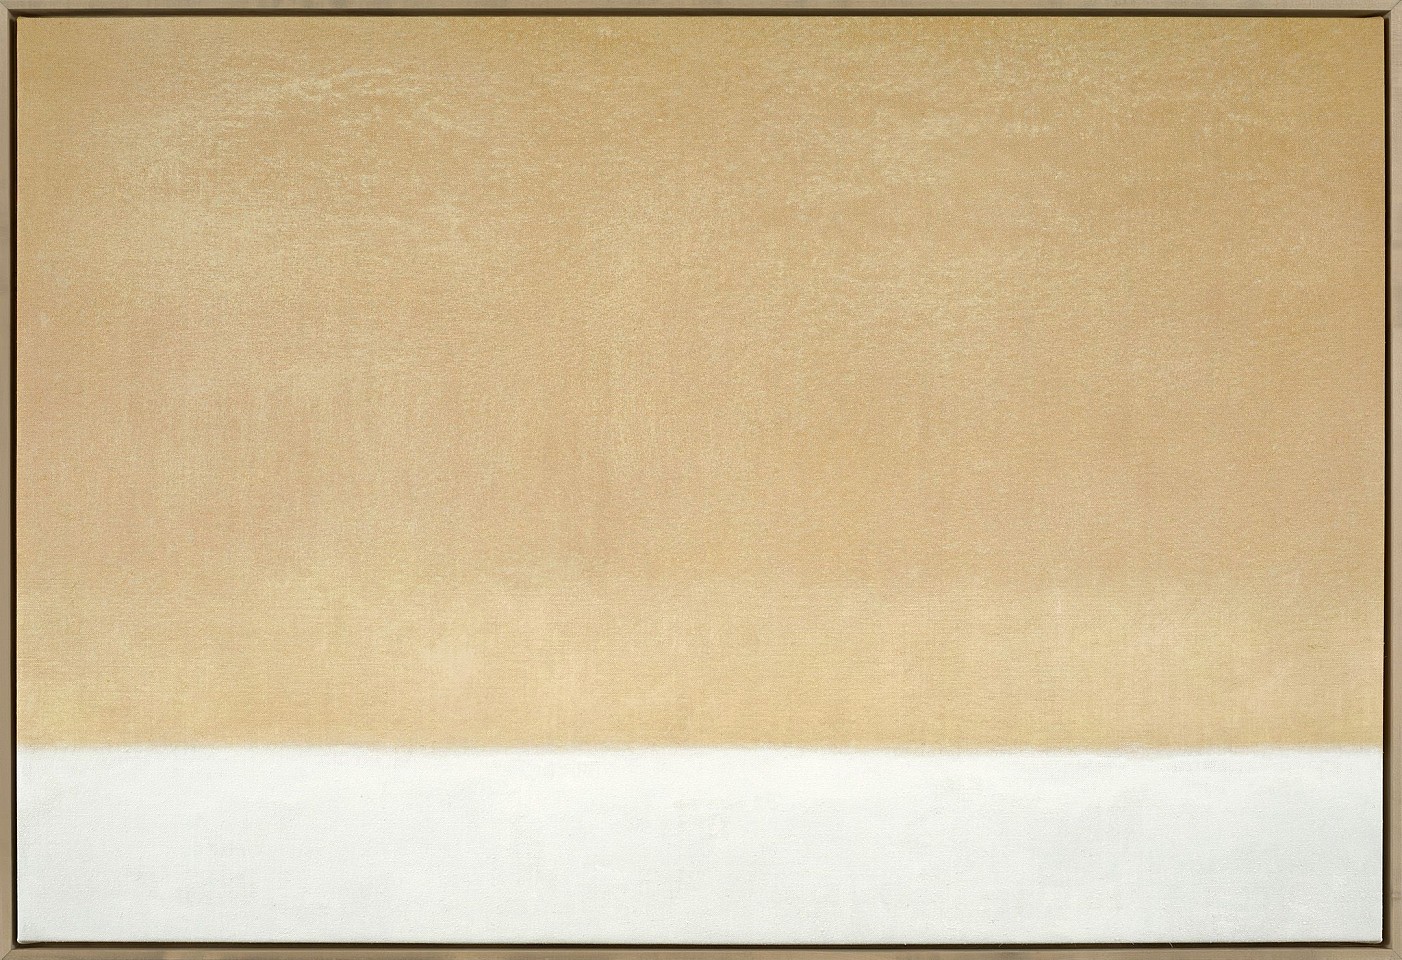 Susan Vecsey, Untitled (Yellow) | SOLD, 2022
Oil on linen, 42 x 62 in. (106.7 x 157.5 cm)
VEC-00240